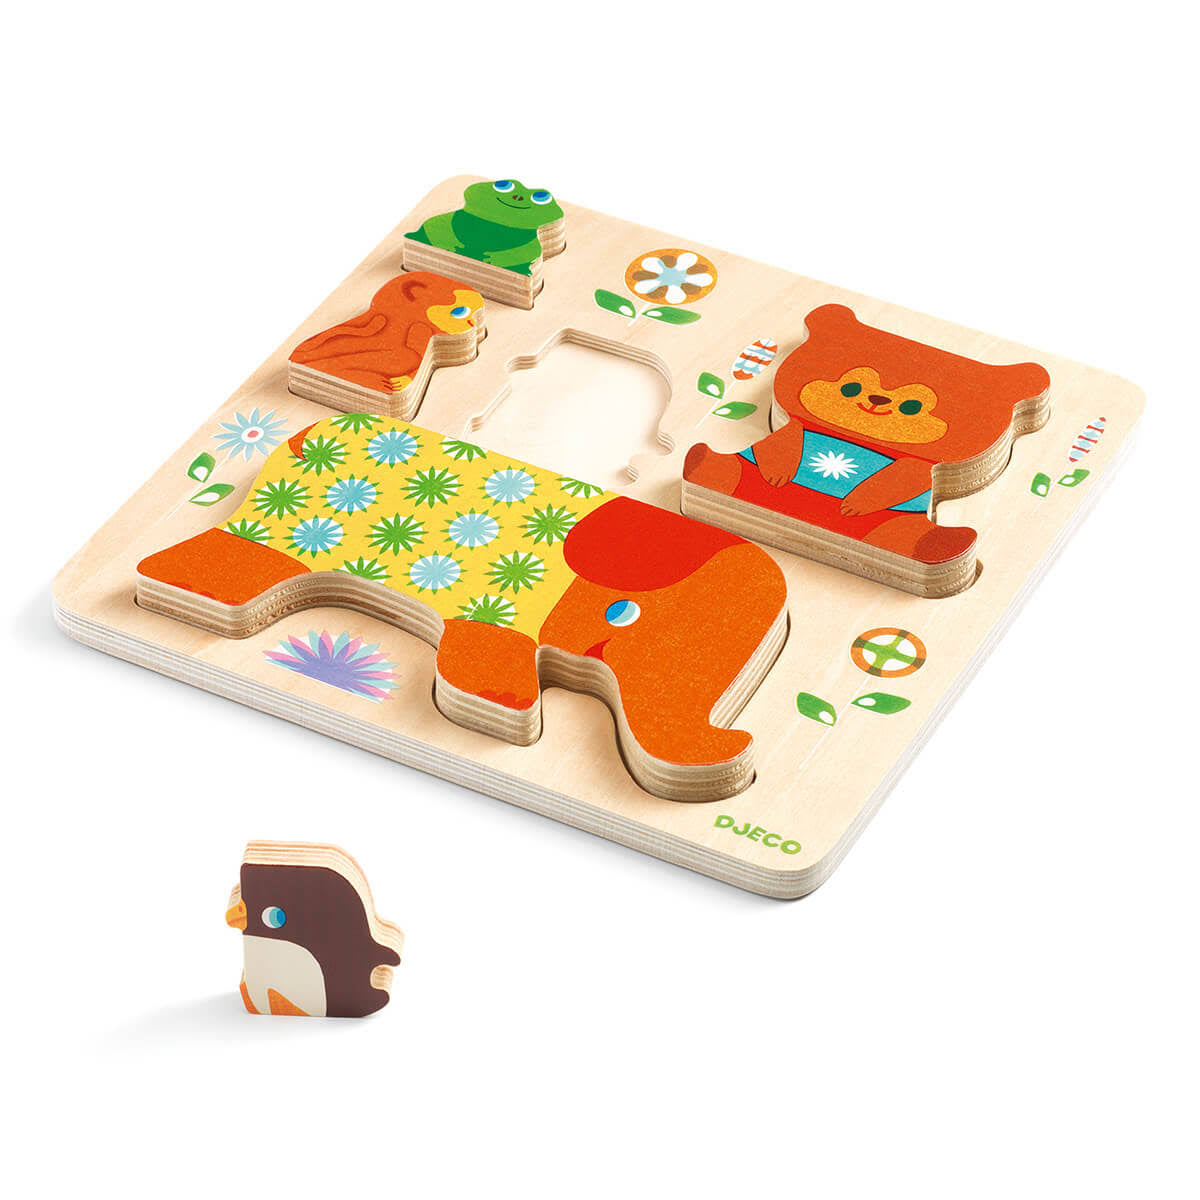 Woodypile Wooden Puzzle & Stacking Toy